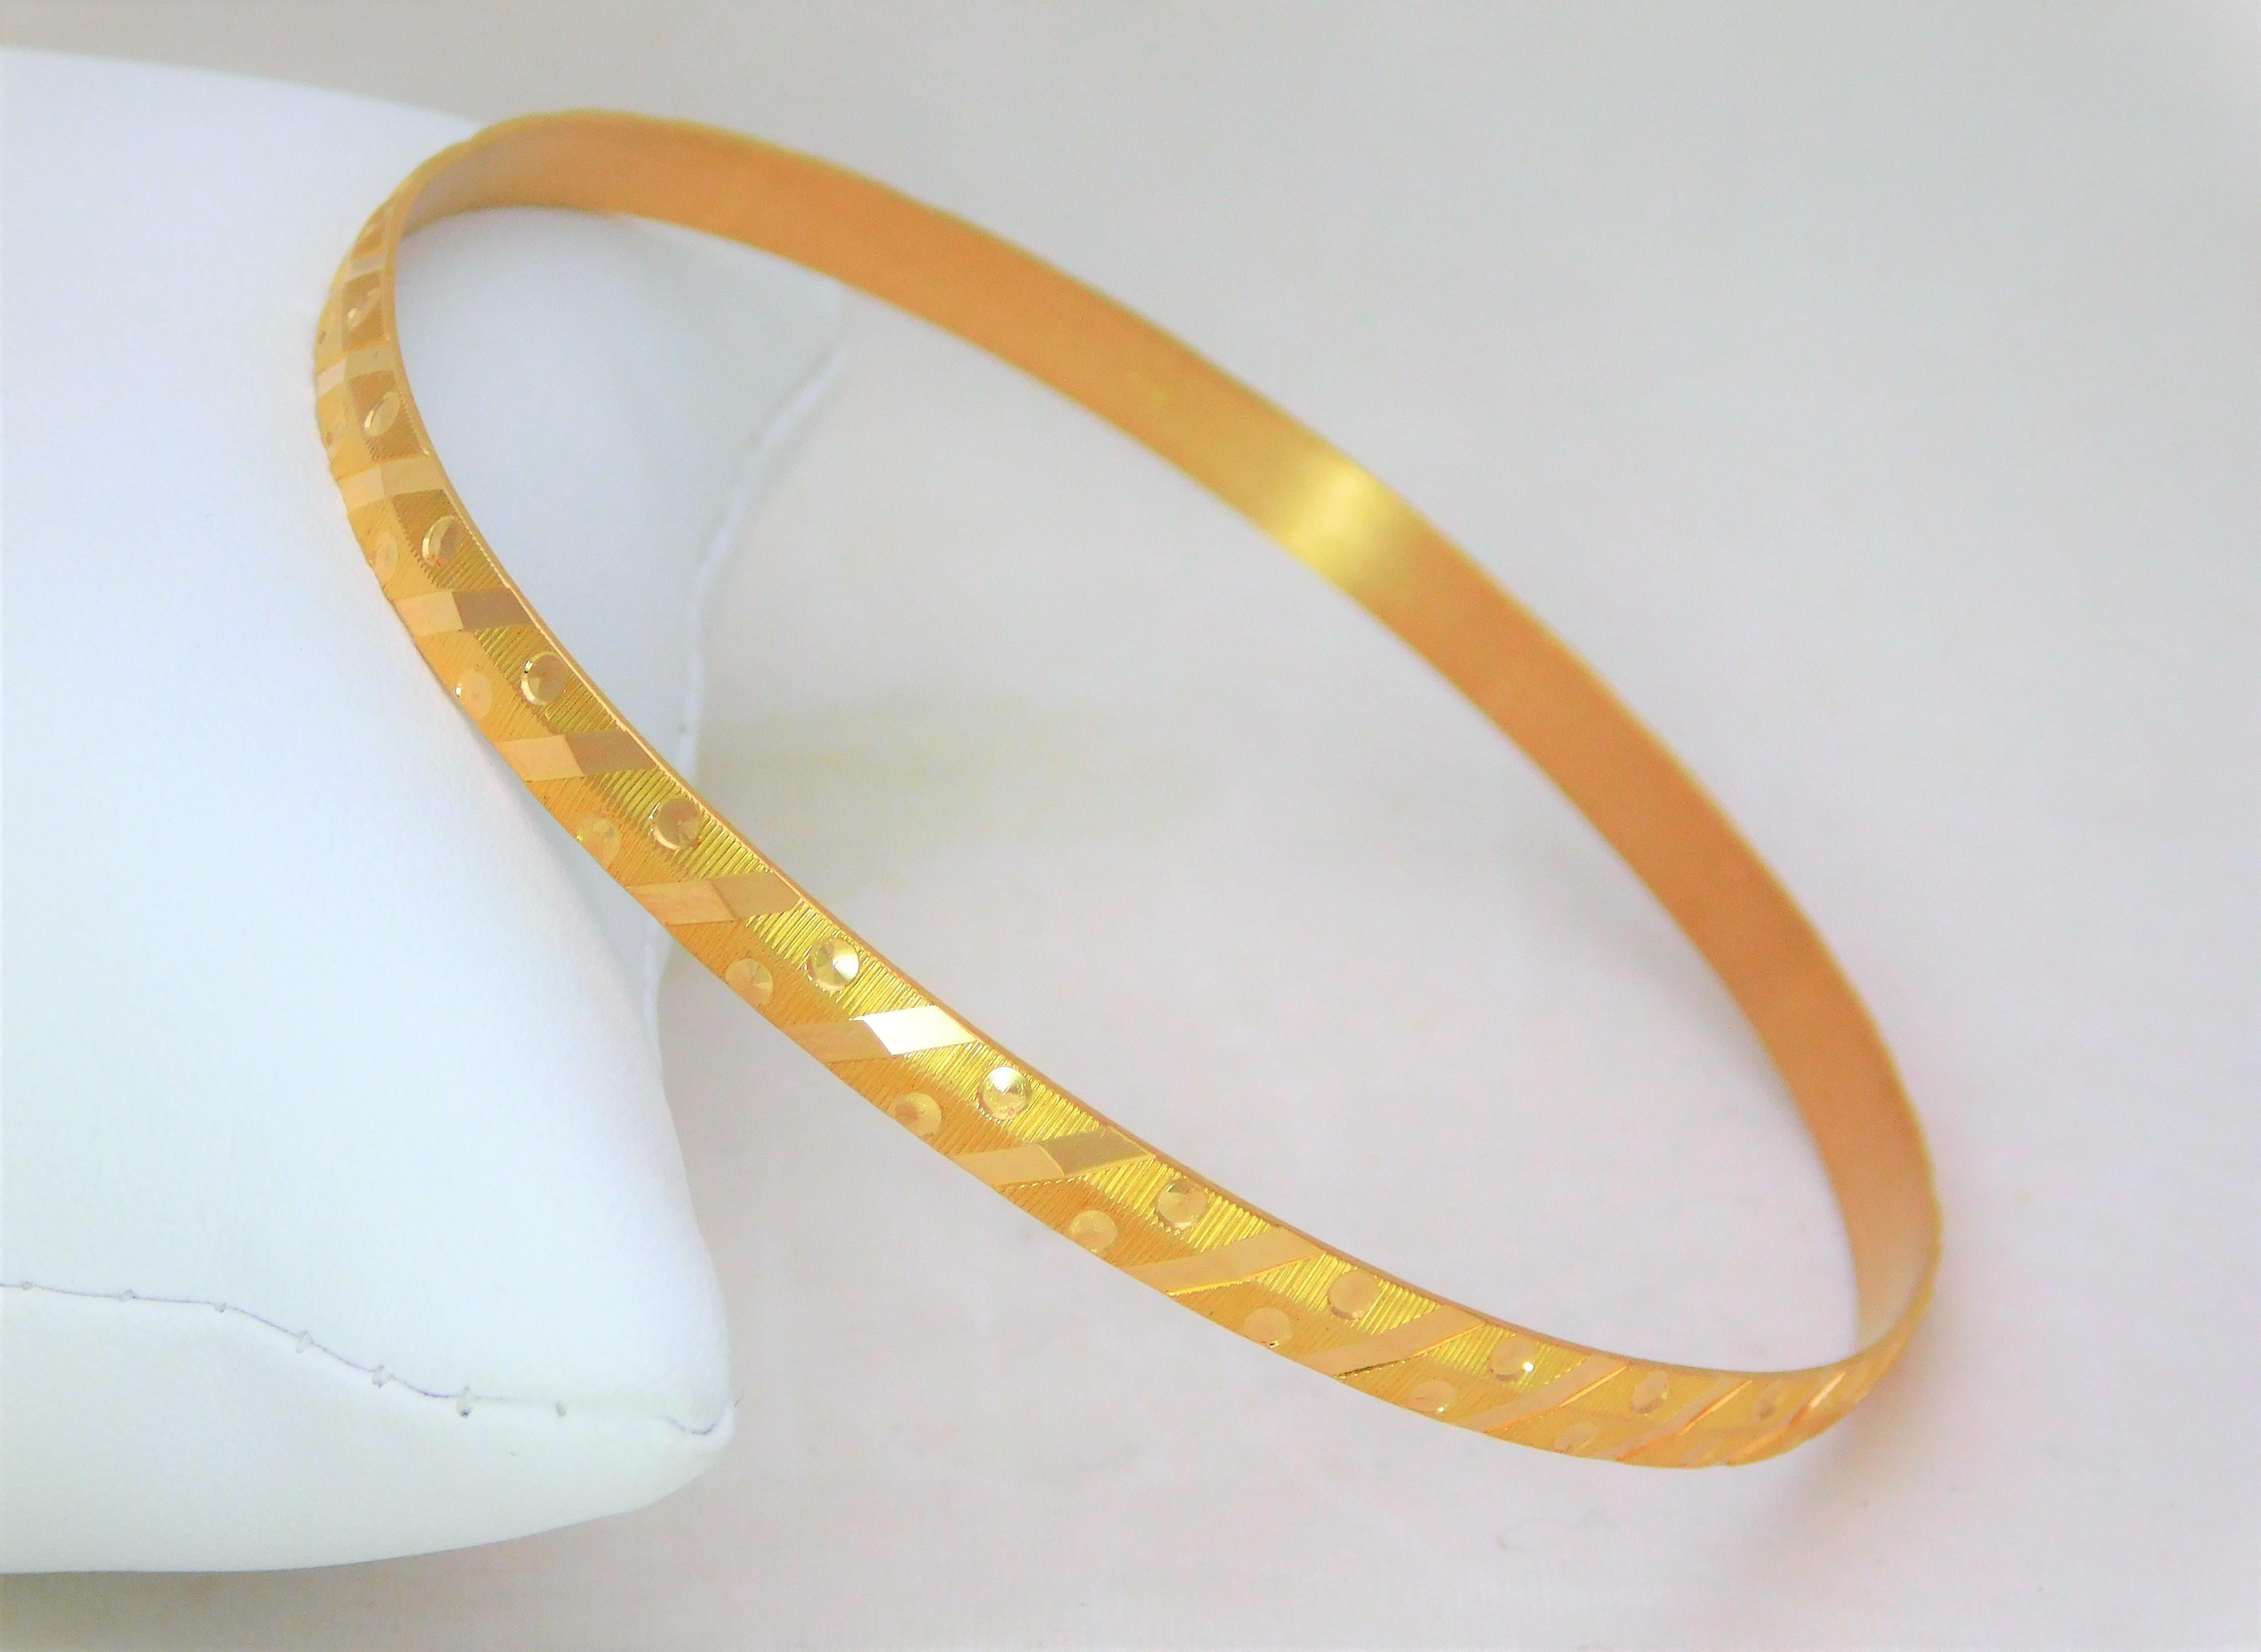 Purchased in the Middle-East. Circa 1970. This stunning bangle style bracelet has been crafted in 21k yellow gold. It is in amazing original condition. Our restoration only included light hand polishing. This miraculous piece features ornate